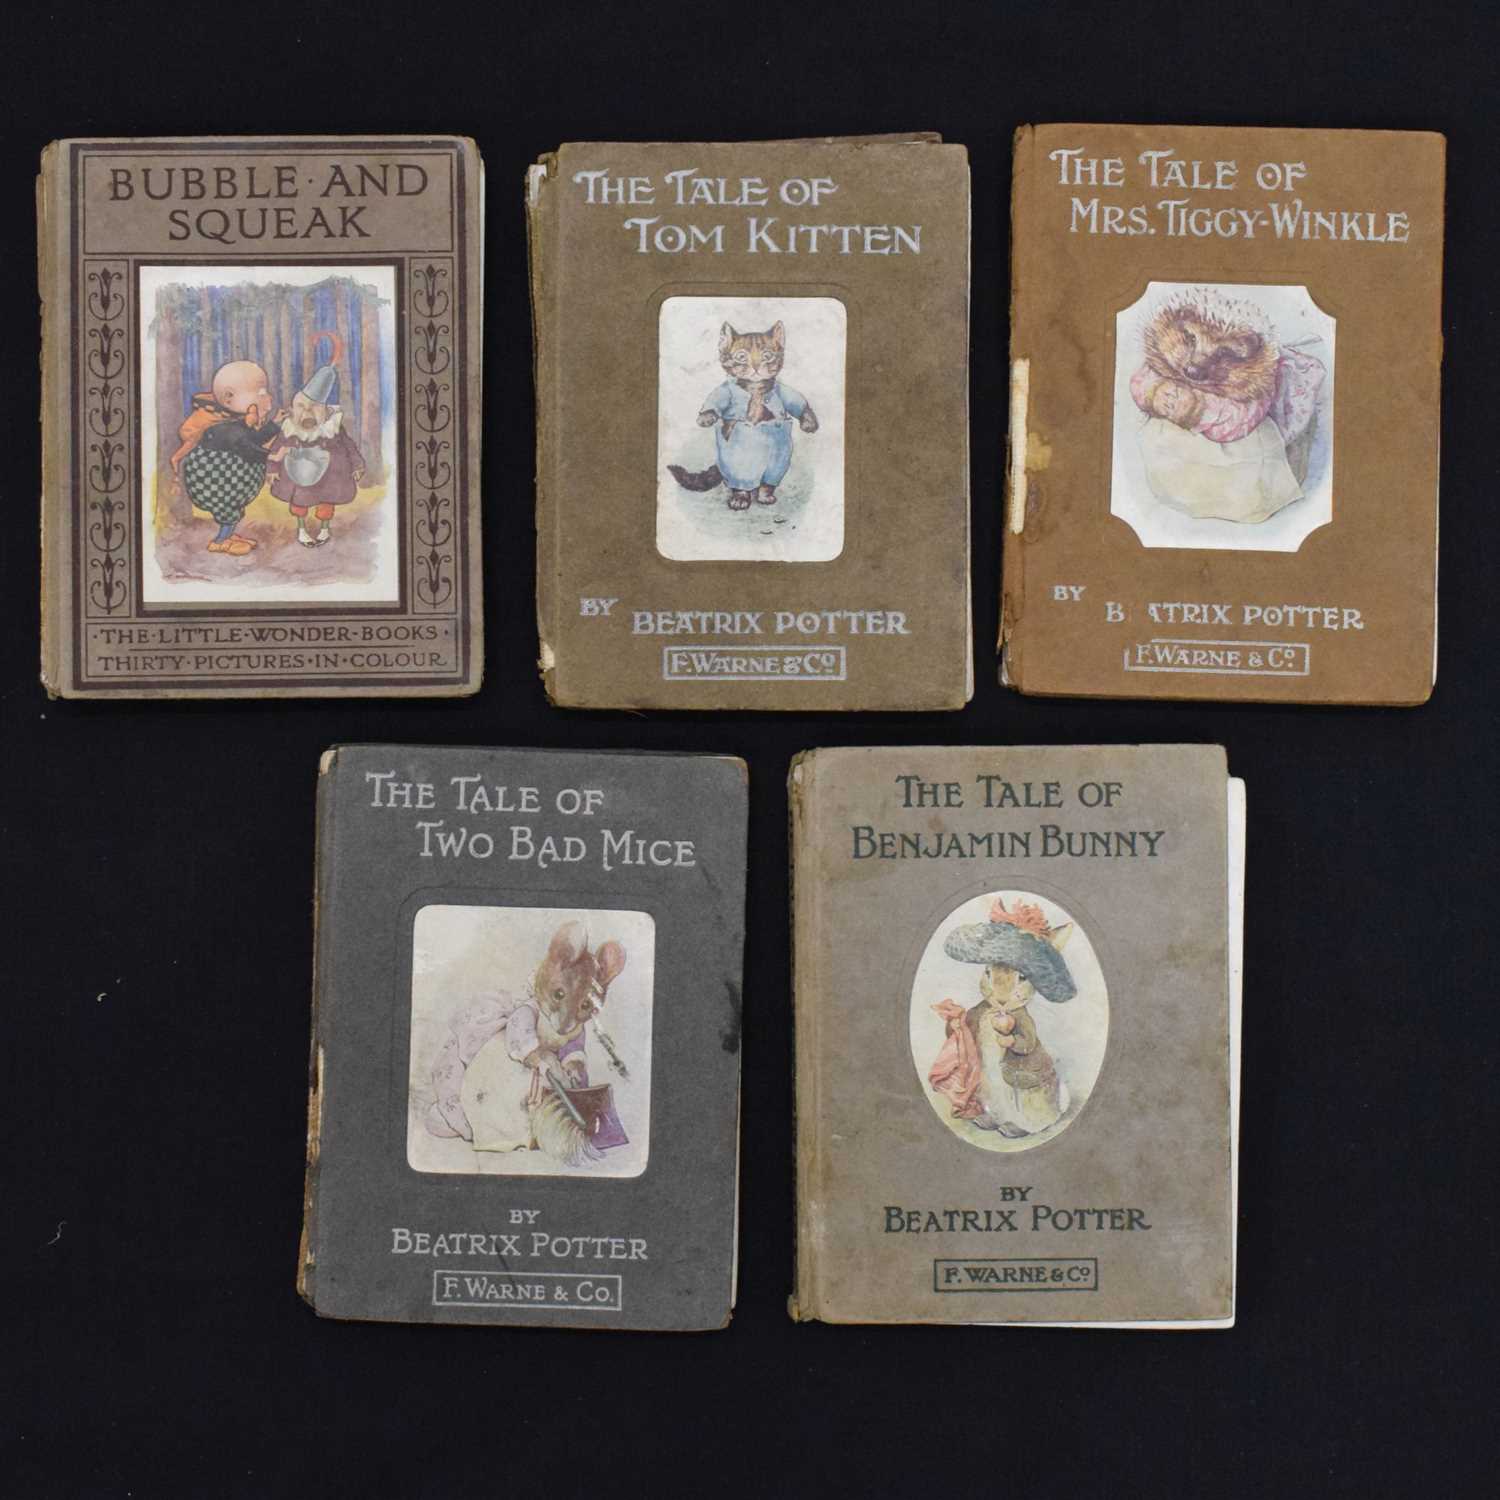 First edition of 'Bubble and Squeak' by Harry Golding, with four very early Beatrix Potter books